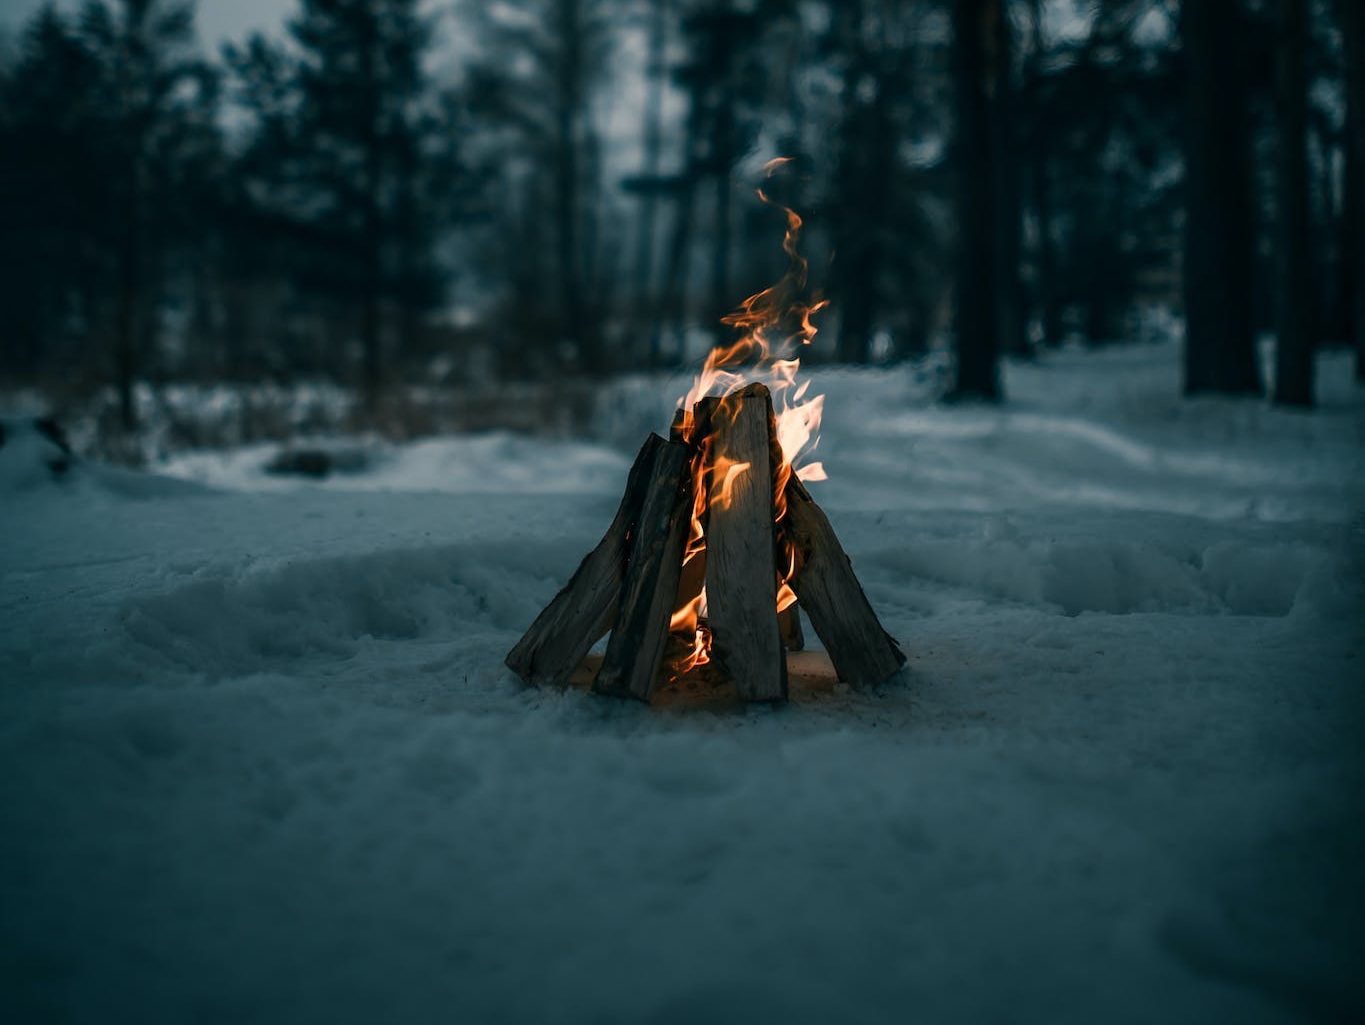 A Campfire on a Snow Covered Ground